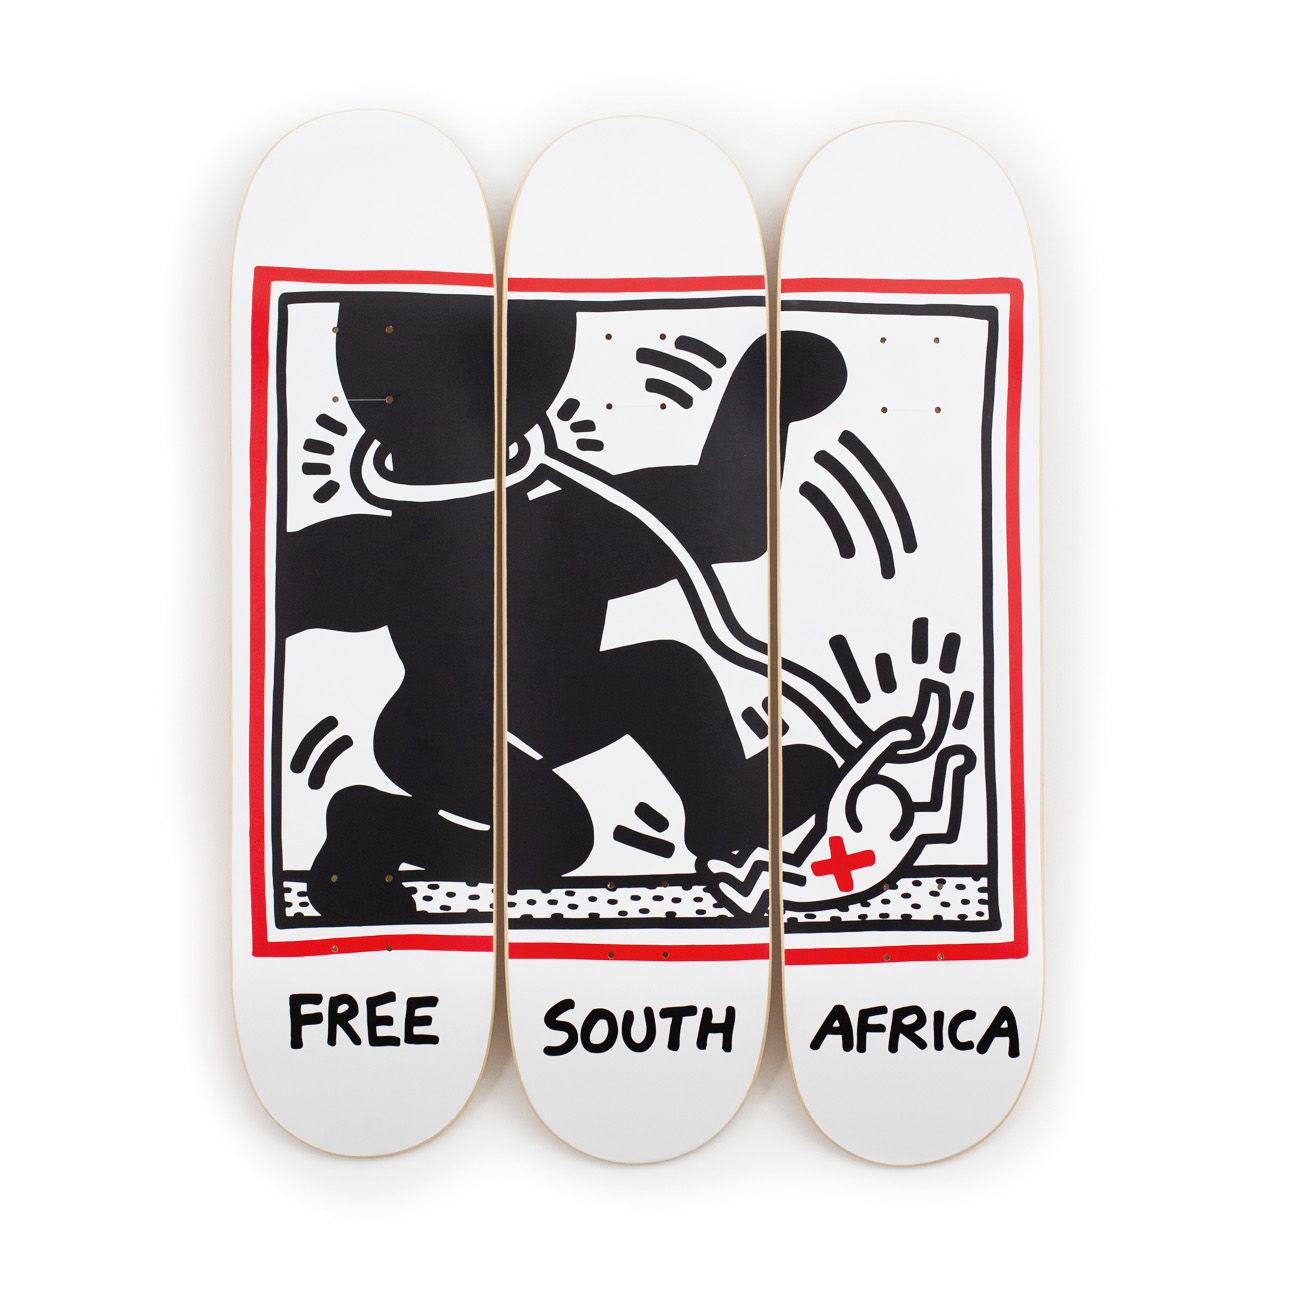 Keith Haring
Free South Africa, 2022
Print on 7 ply Grade A Canadian Maple wood
31 1/2 × 7 9/10 in  80 × 20 cm (each)